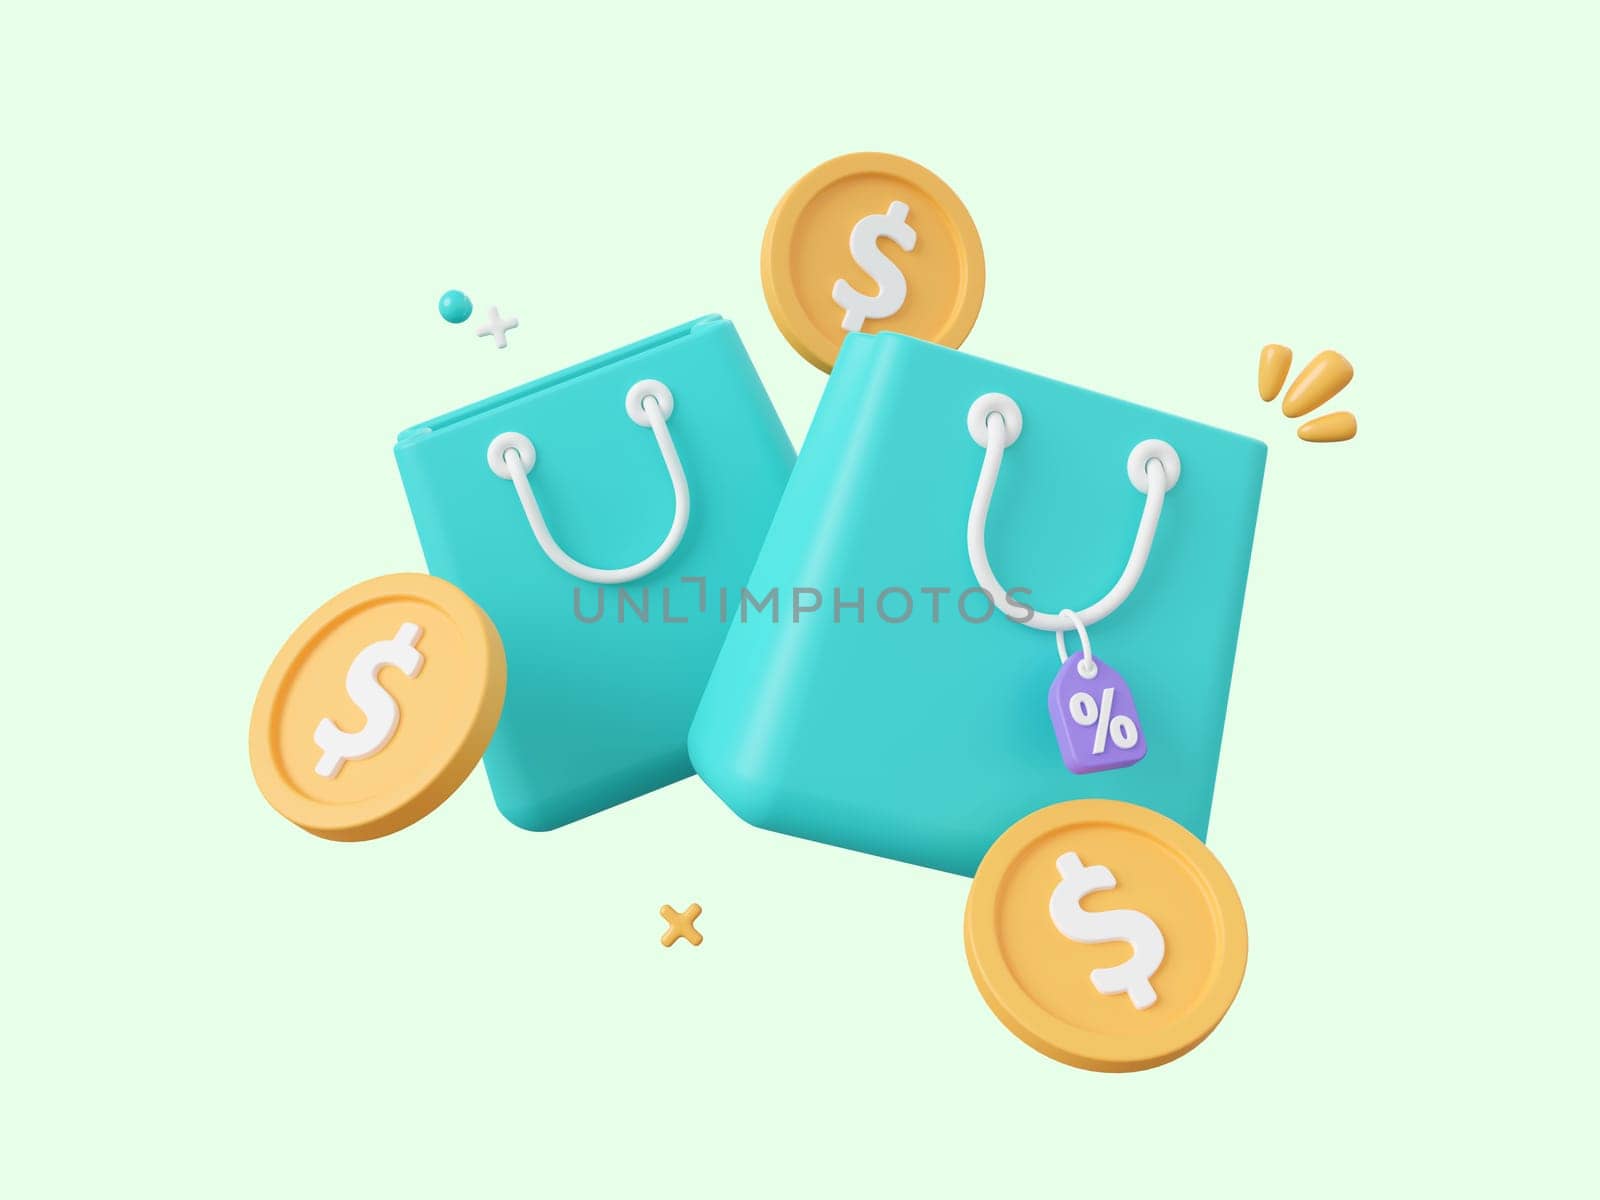 3d cartoon design illustration of Shopping bags with discount tag and dollar coin. Shopping online concept. by nutzchotwarut